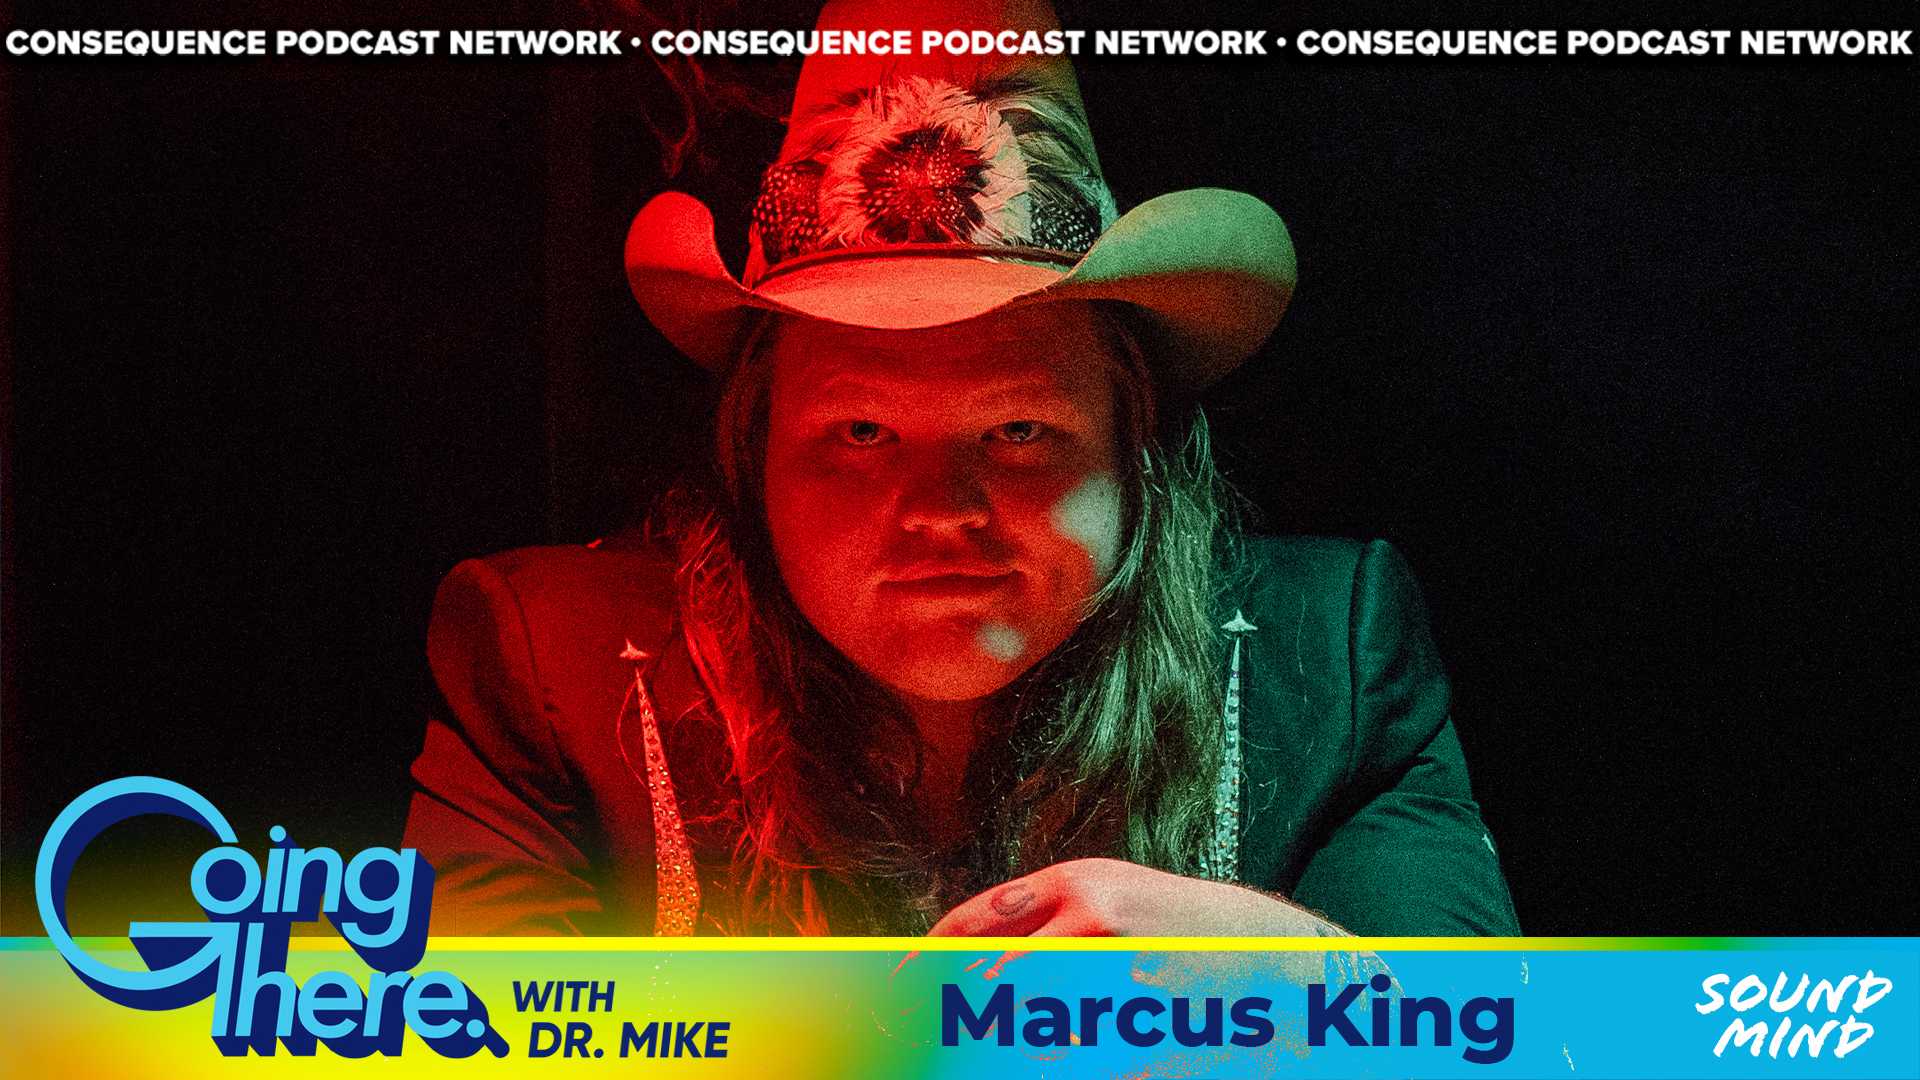 Marcus King on Battling Feelings of “Terrible Hopelessness” with Meaningful Communication: Podcast